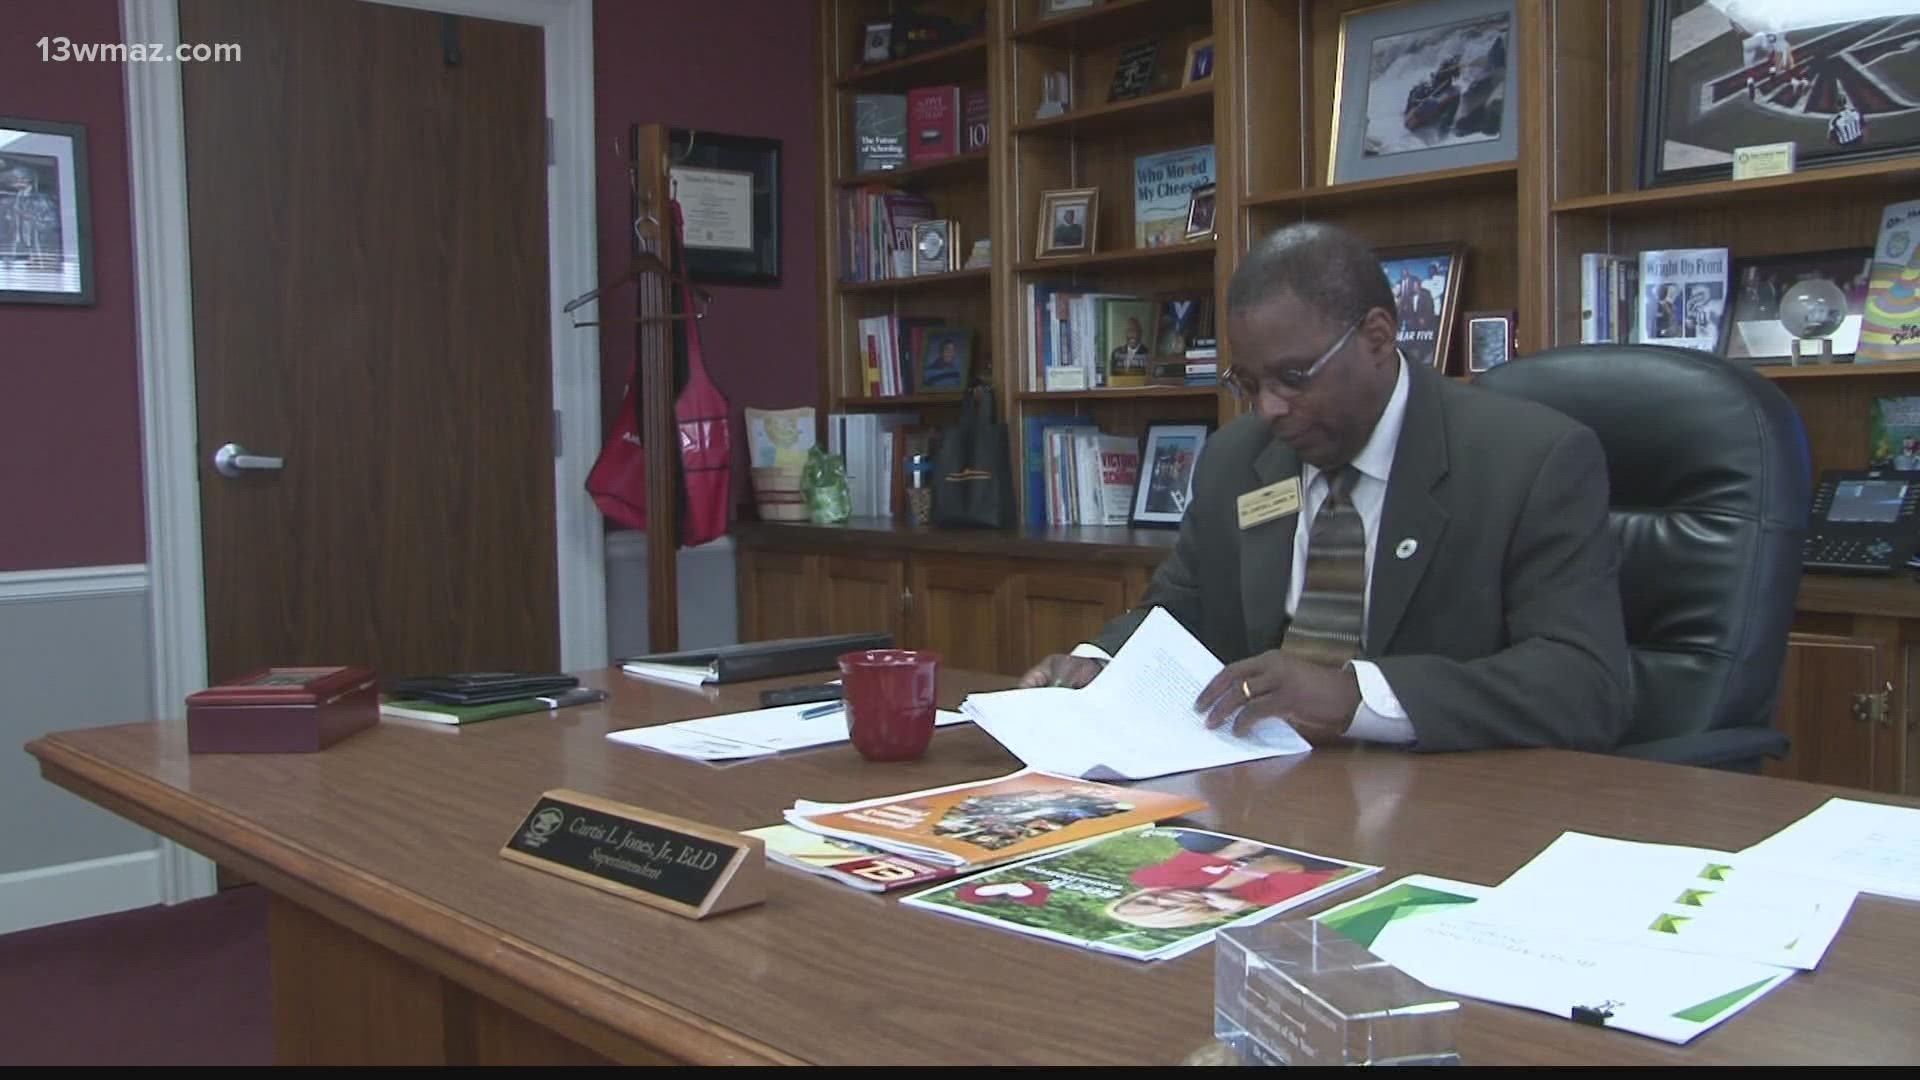 The nationwide search for a new Bibb superintendent is now underway, and school leaders say it won't be an easy process.